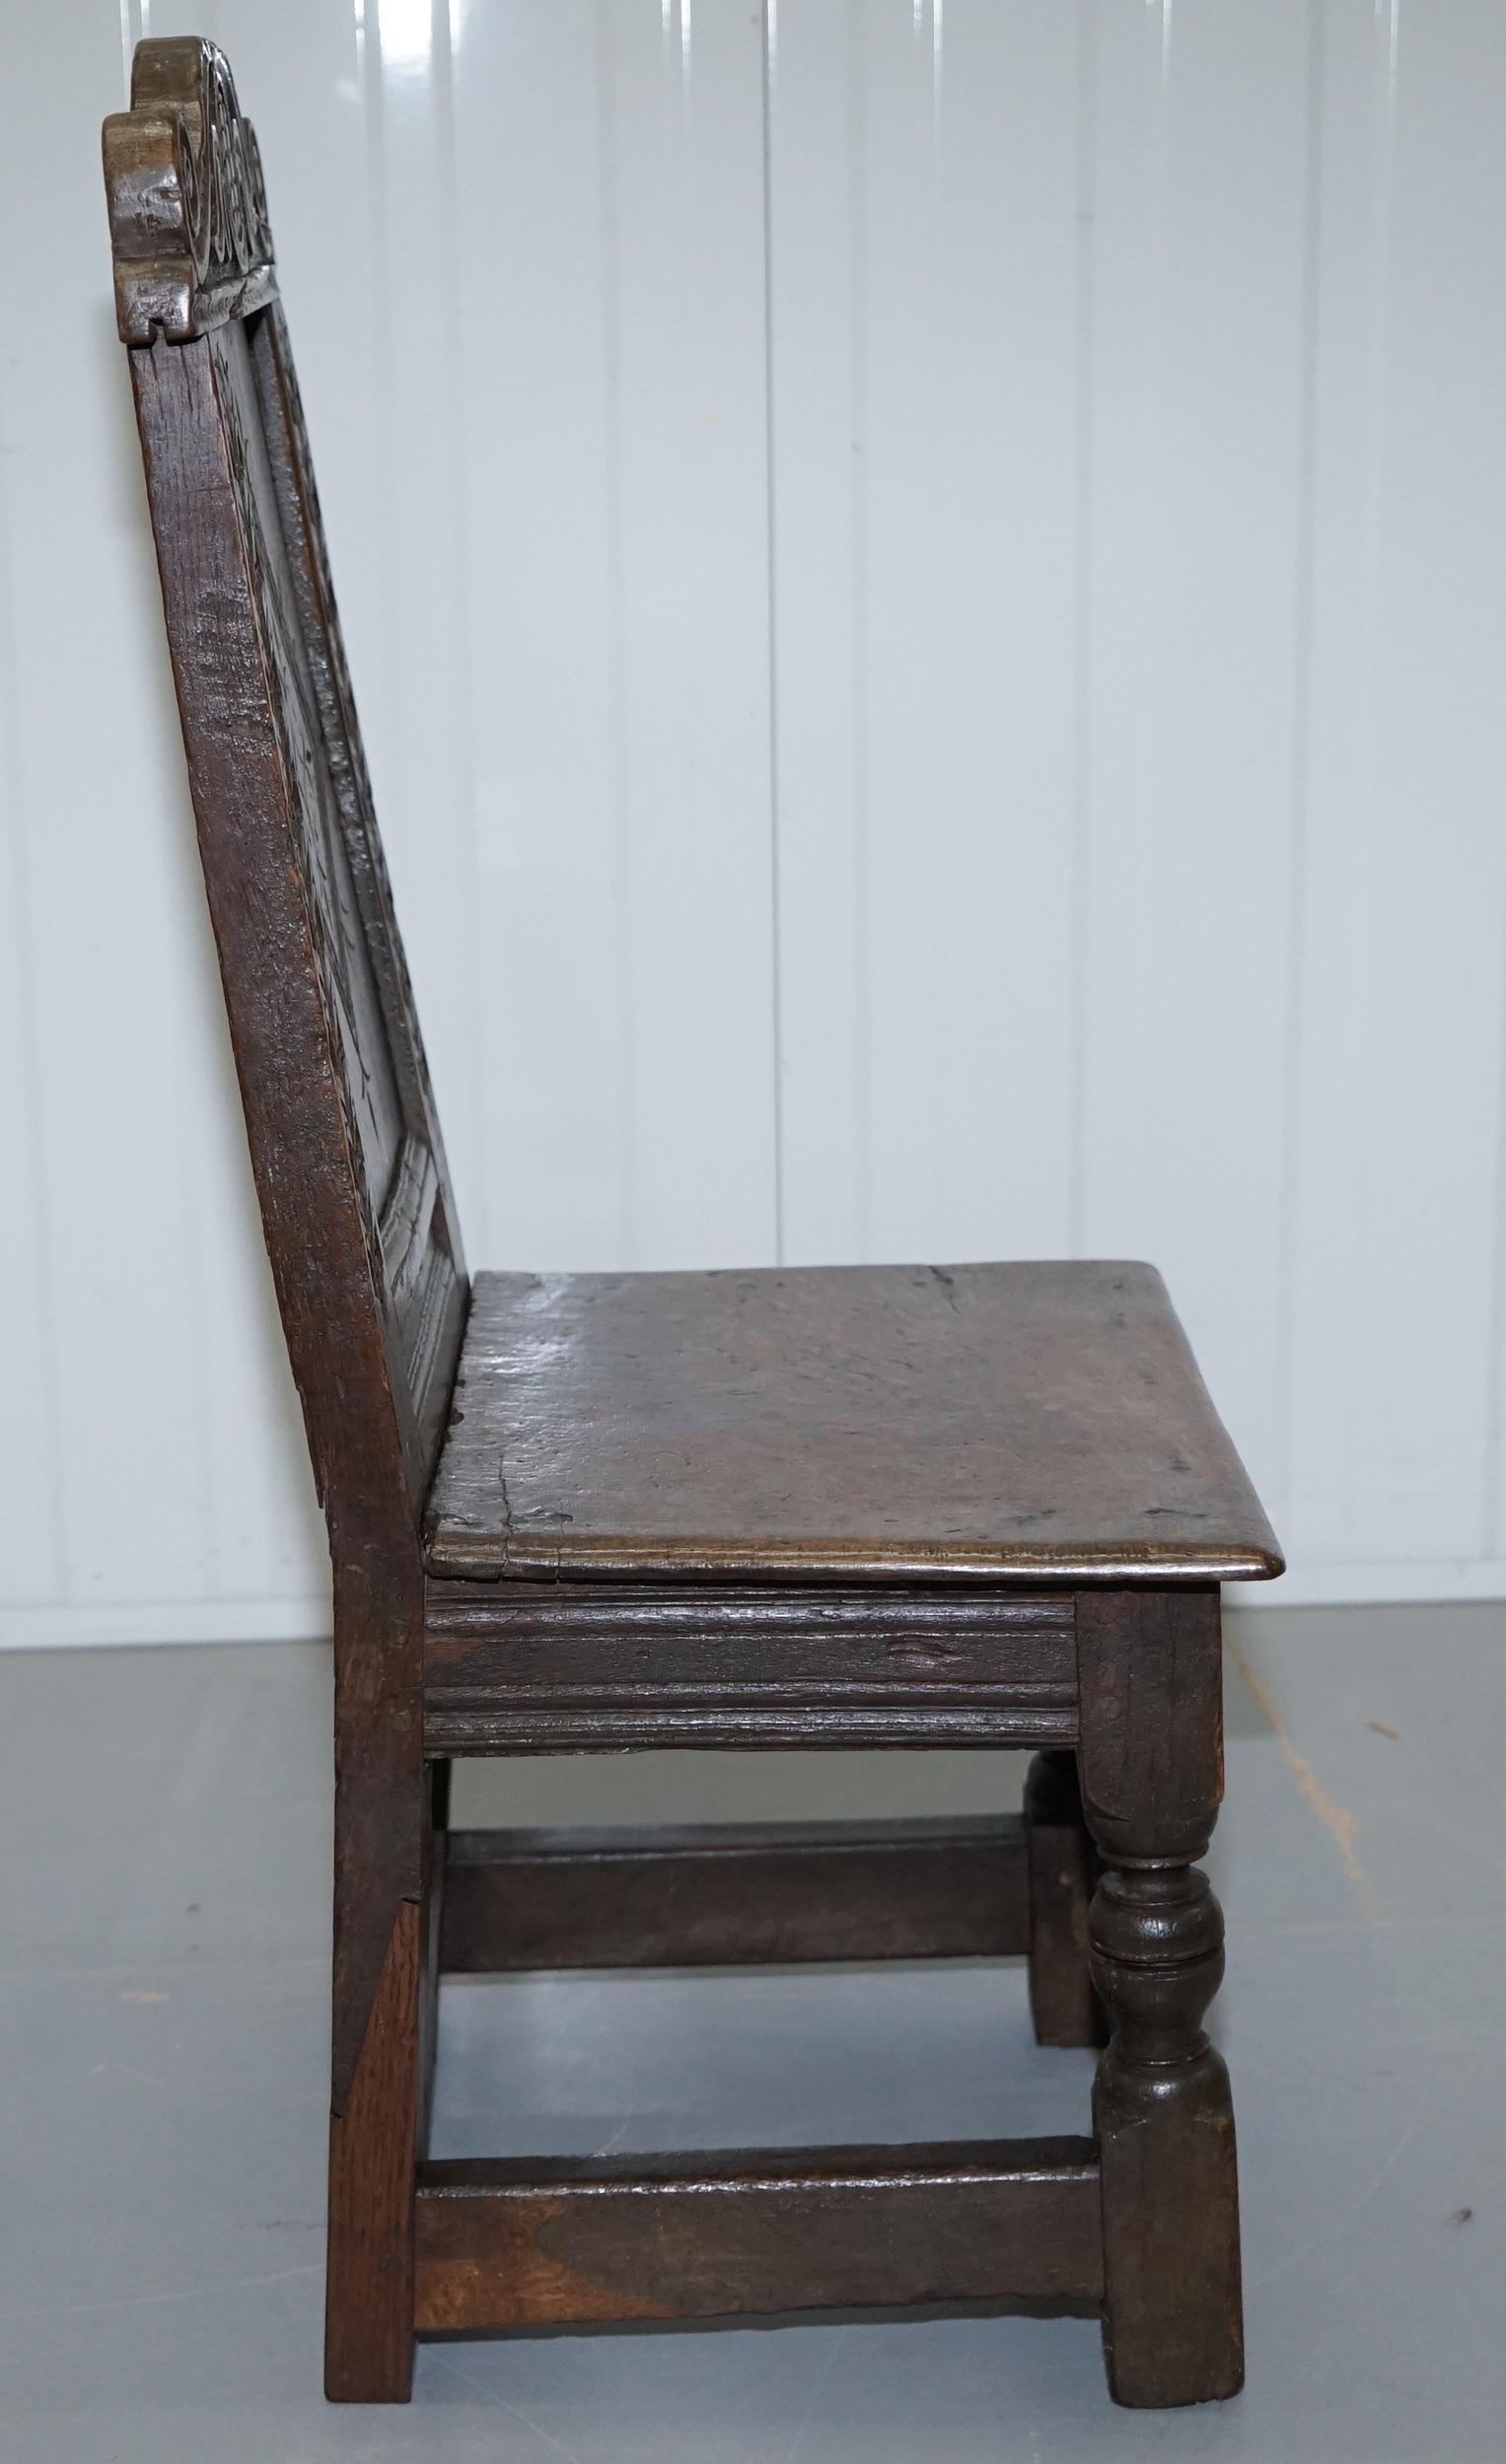 Rare circa 1760 Fruit Wood Chair Nicely Carved Quite Small 18th Century Example For Sale 1